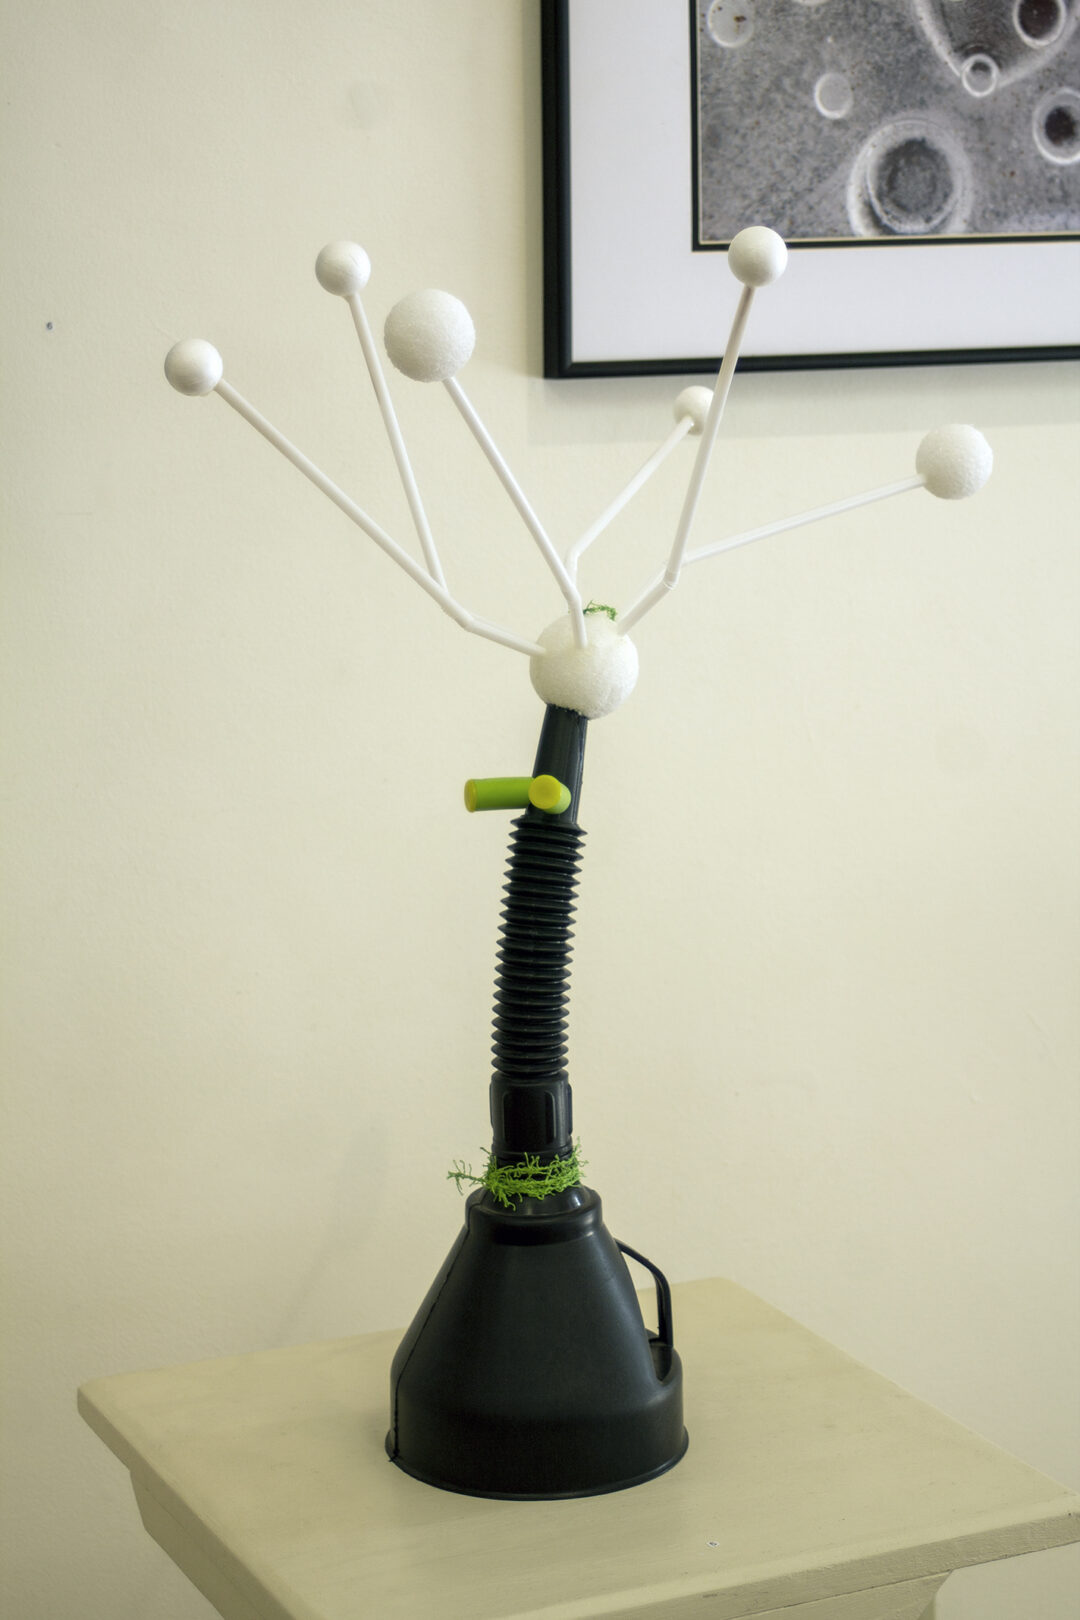 Bill Bonner “Night Watchman” ready-made construction, funnel, straws and foam, $35.00